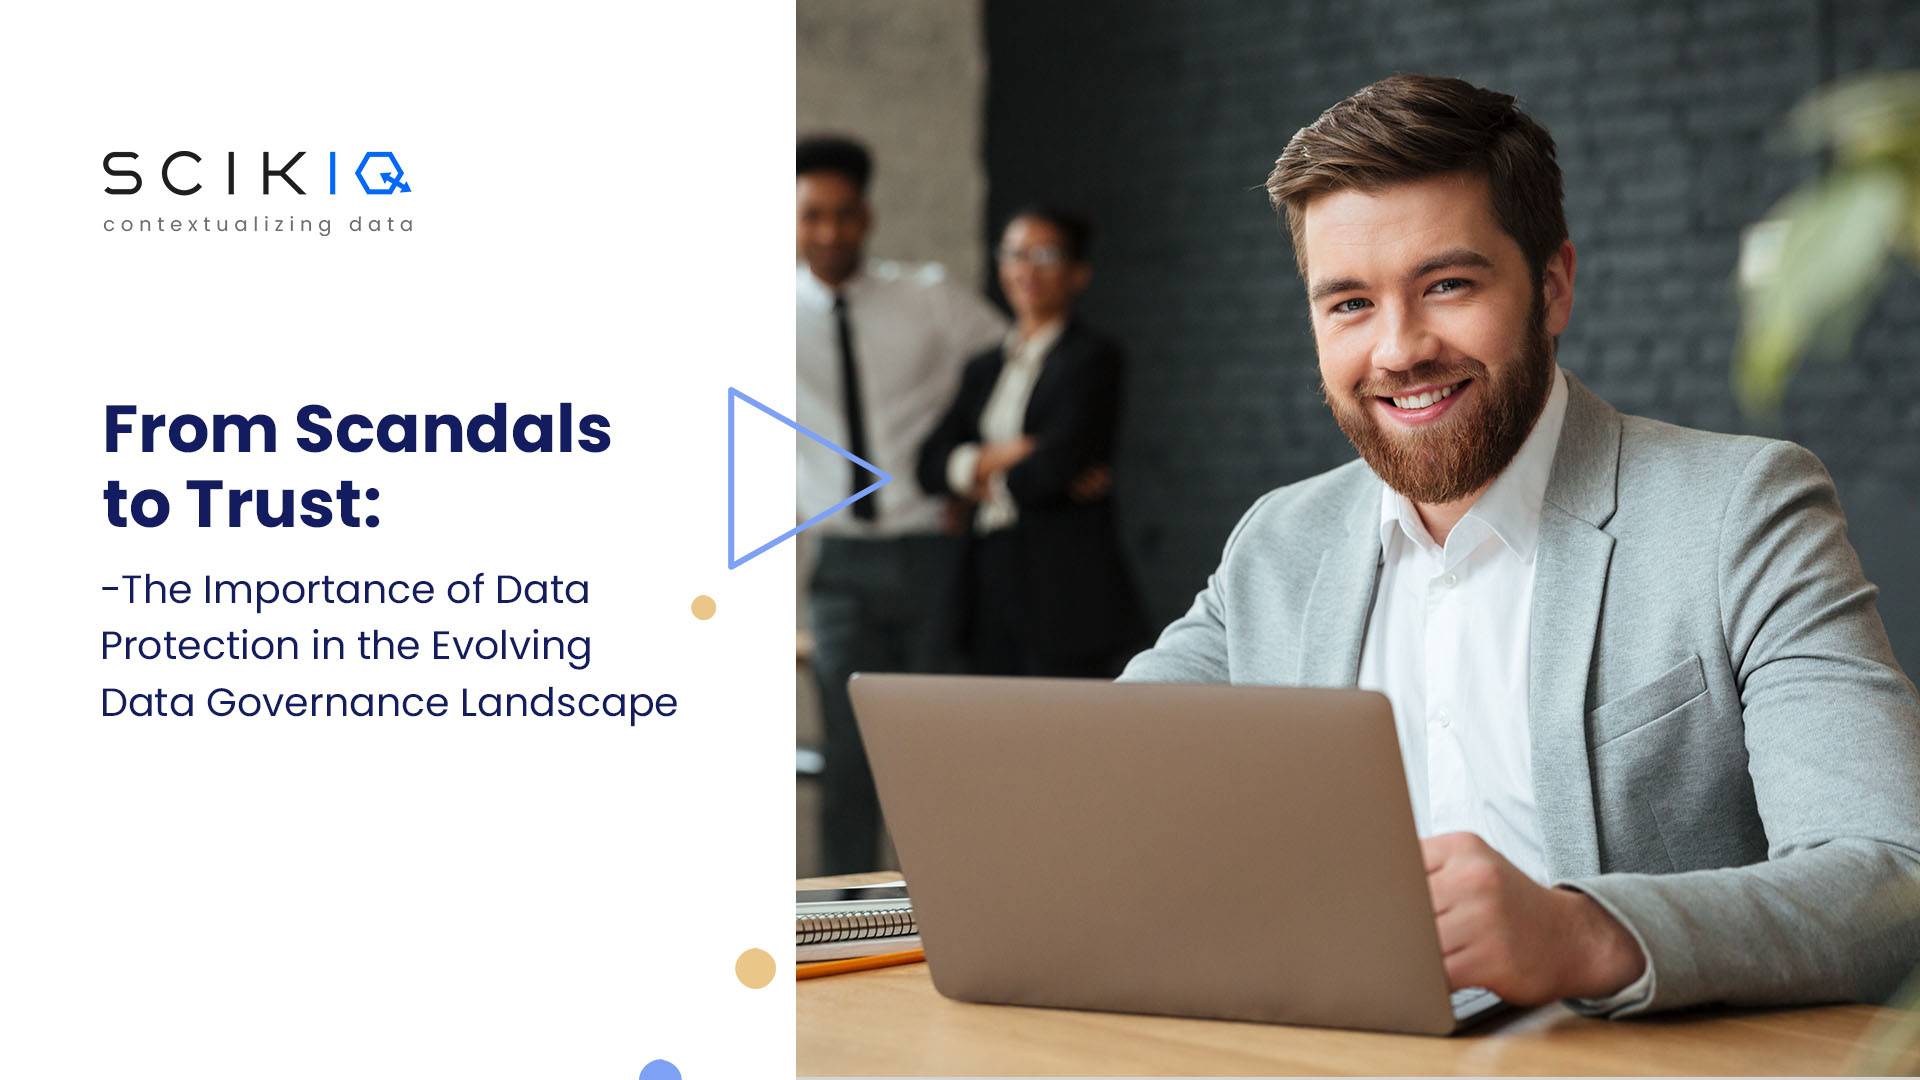 Scandals to Trust: Data Protection in the Evolving Data Governance Landscape